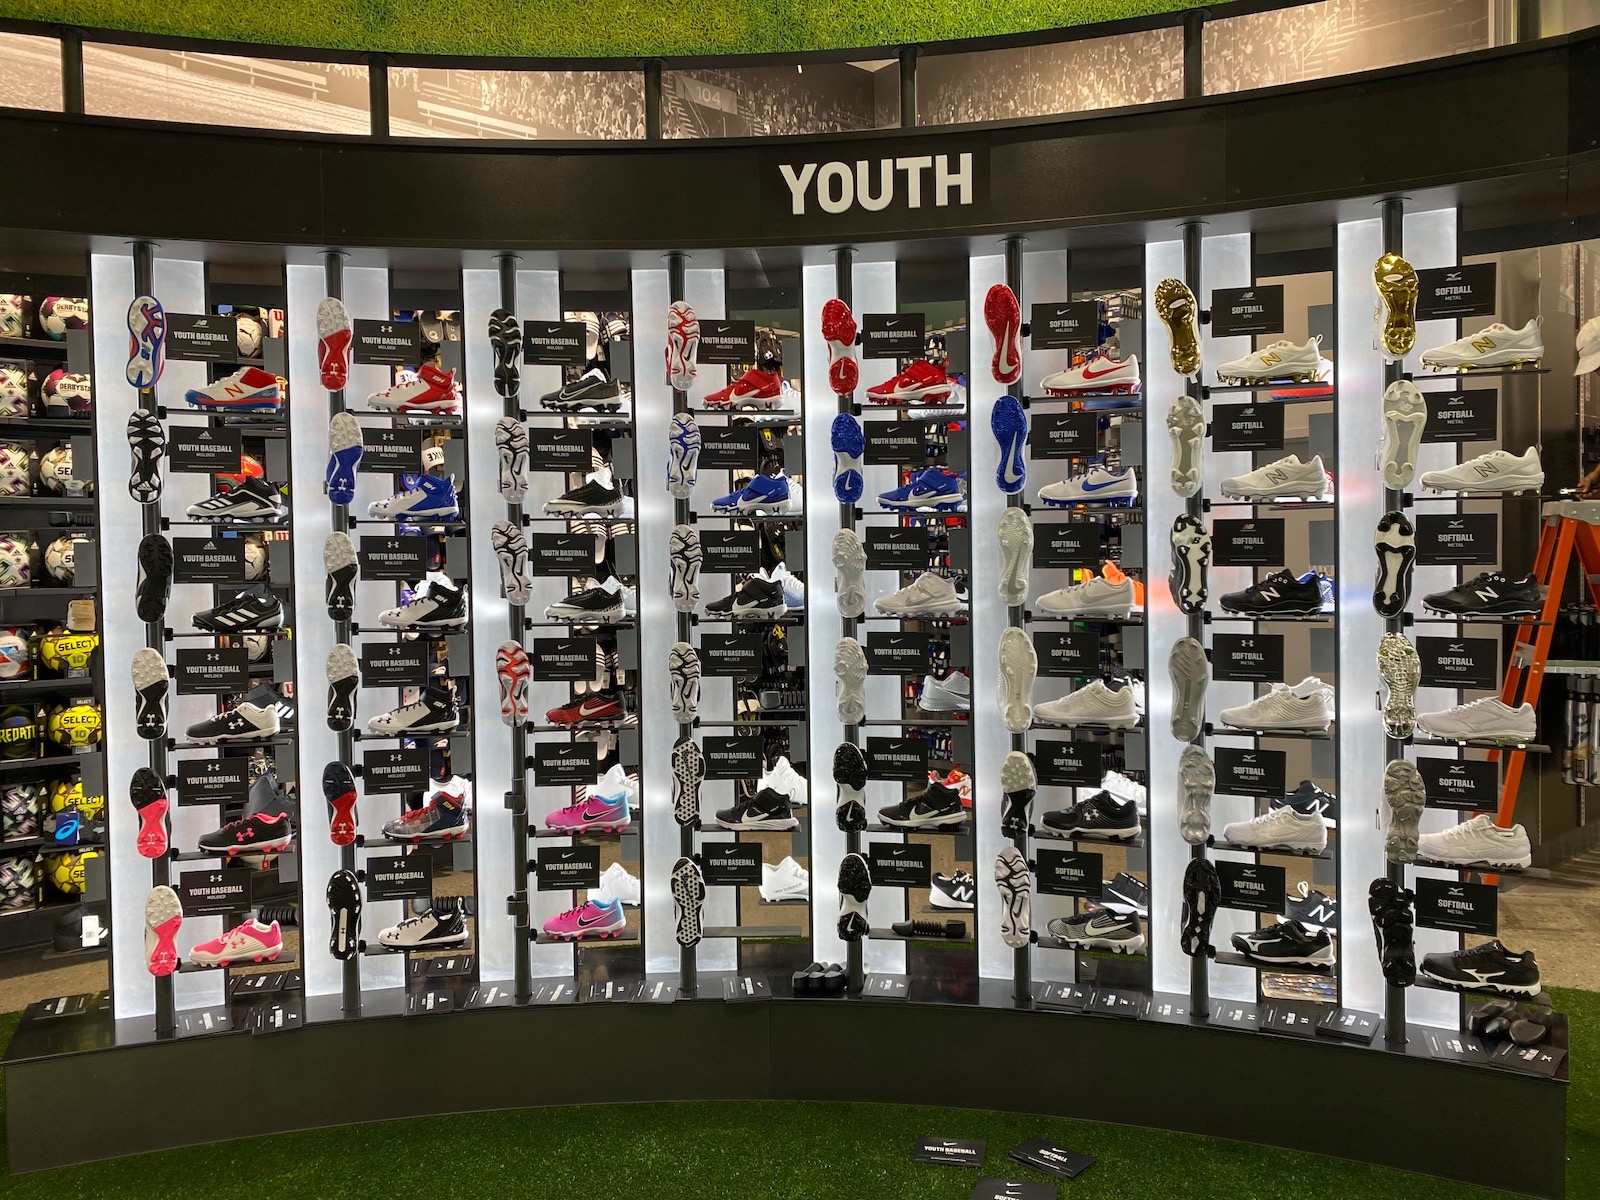 A wall of youth shoes